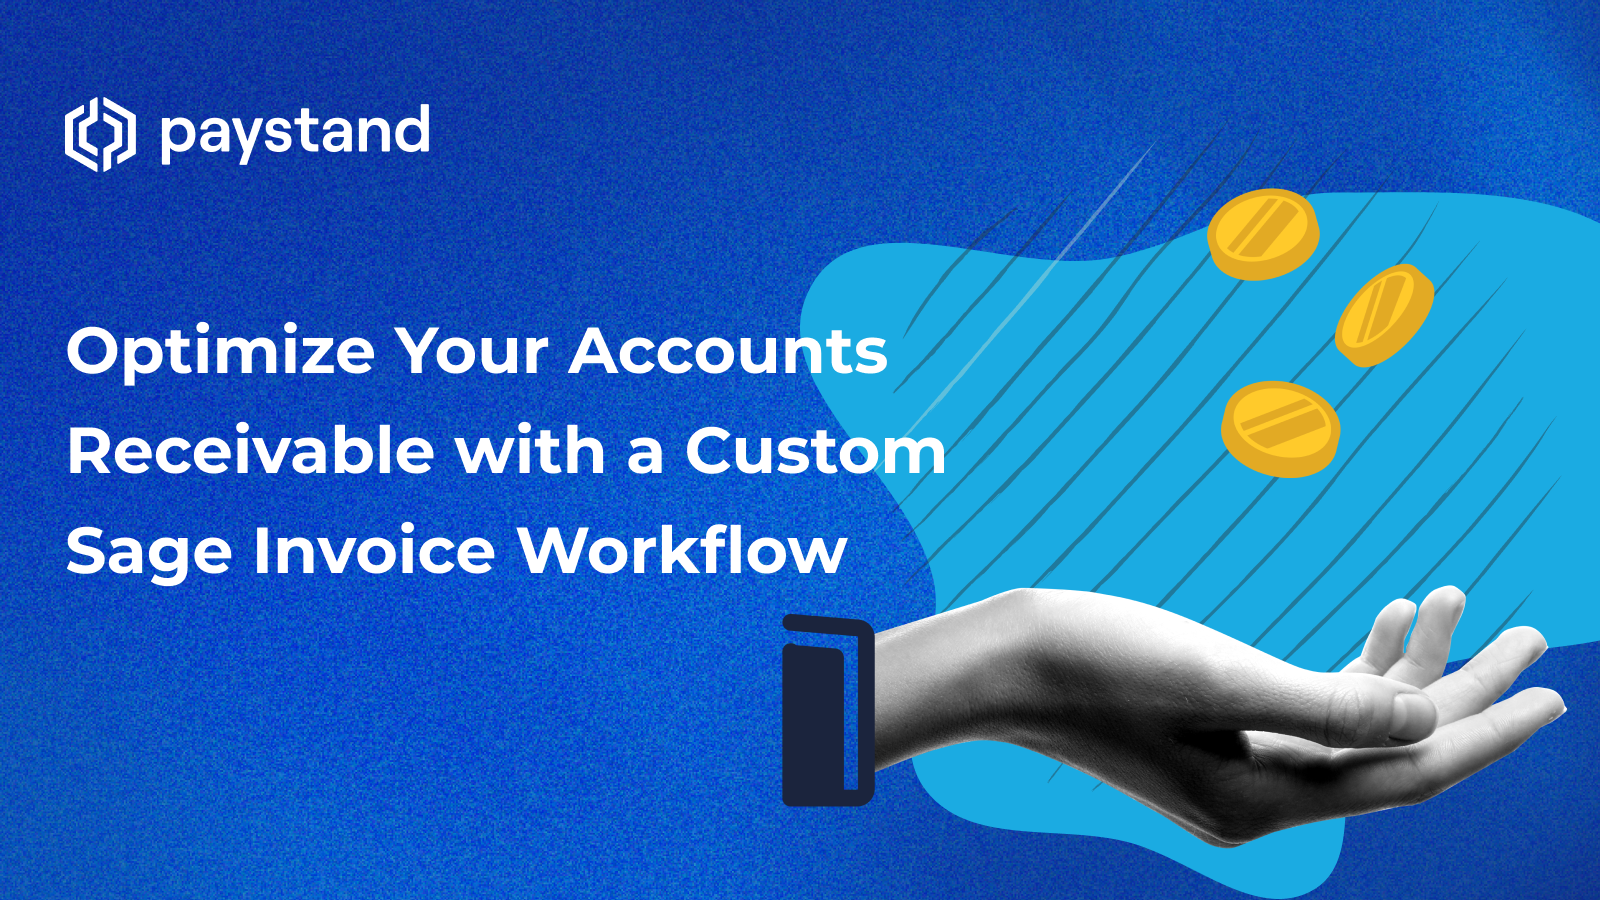 Optimize Your Accounts Receivable with a Custom Sage Invoice Workflow